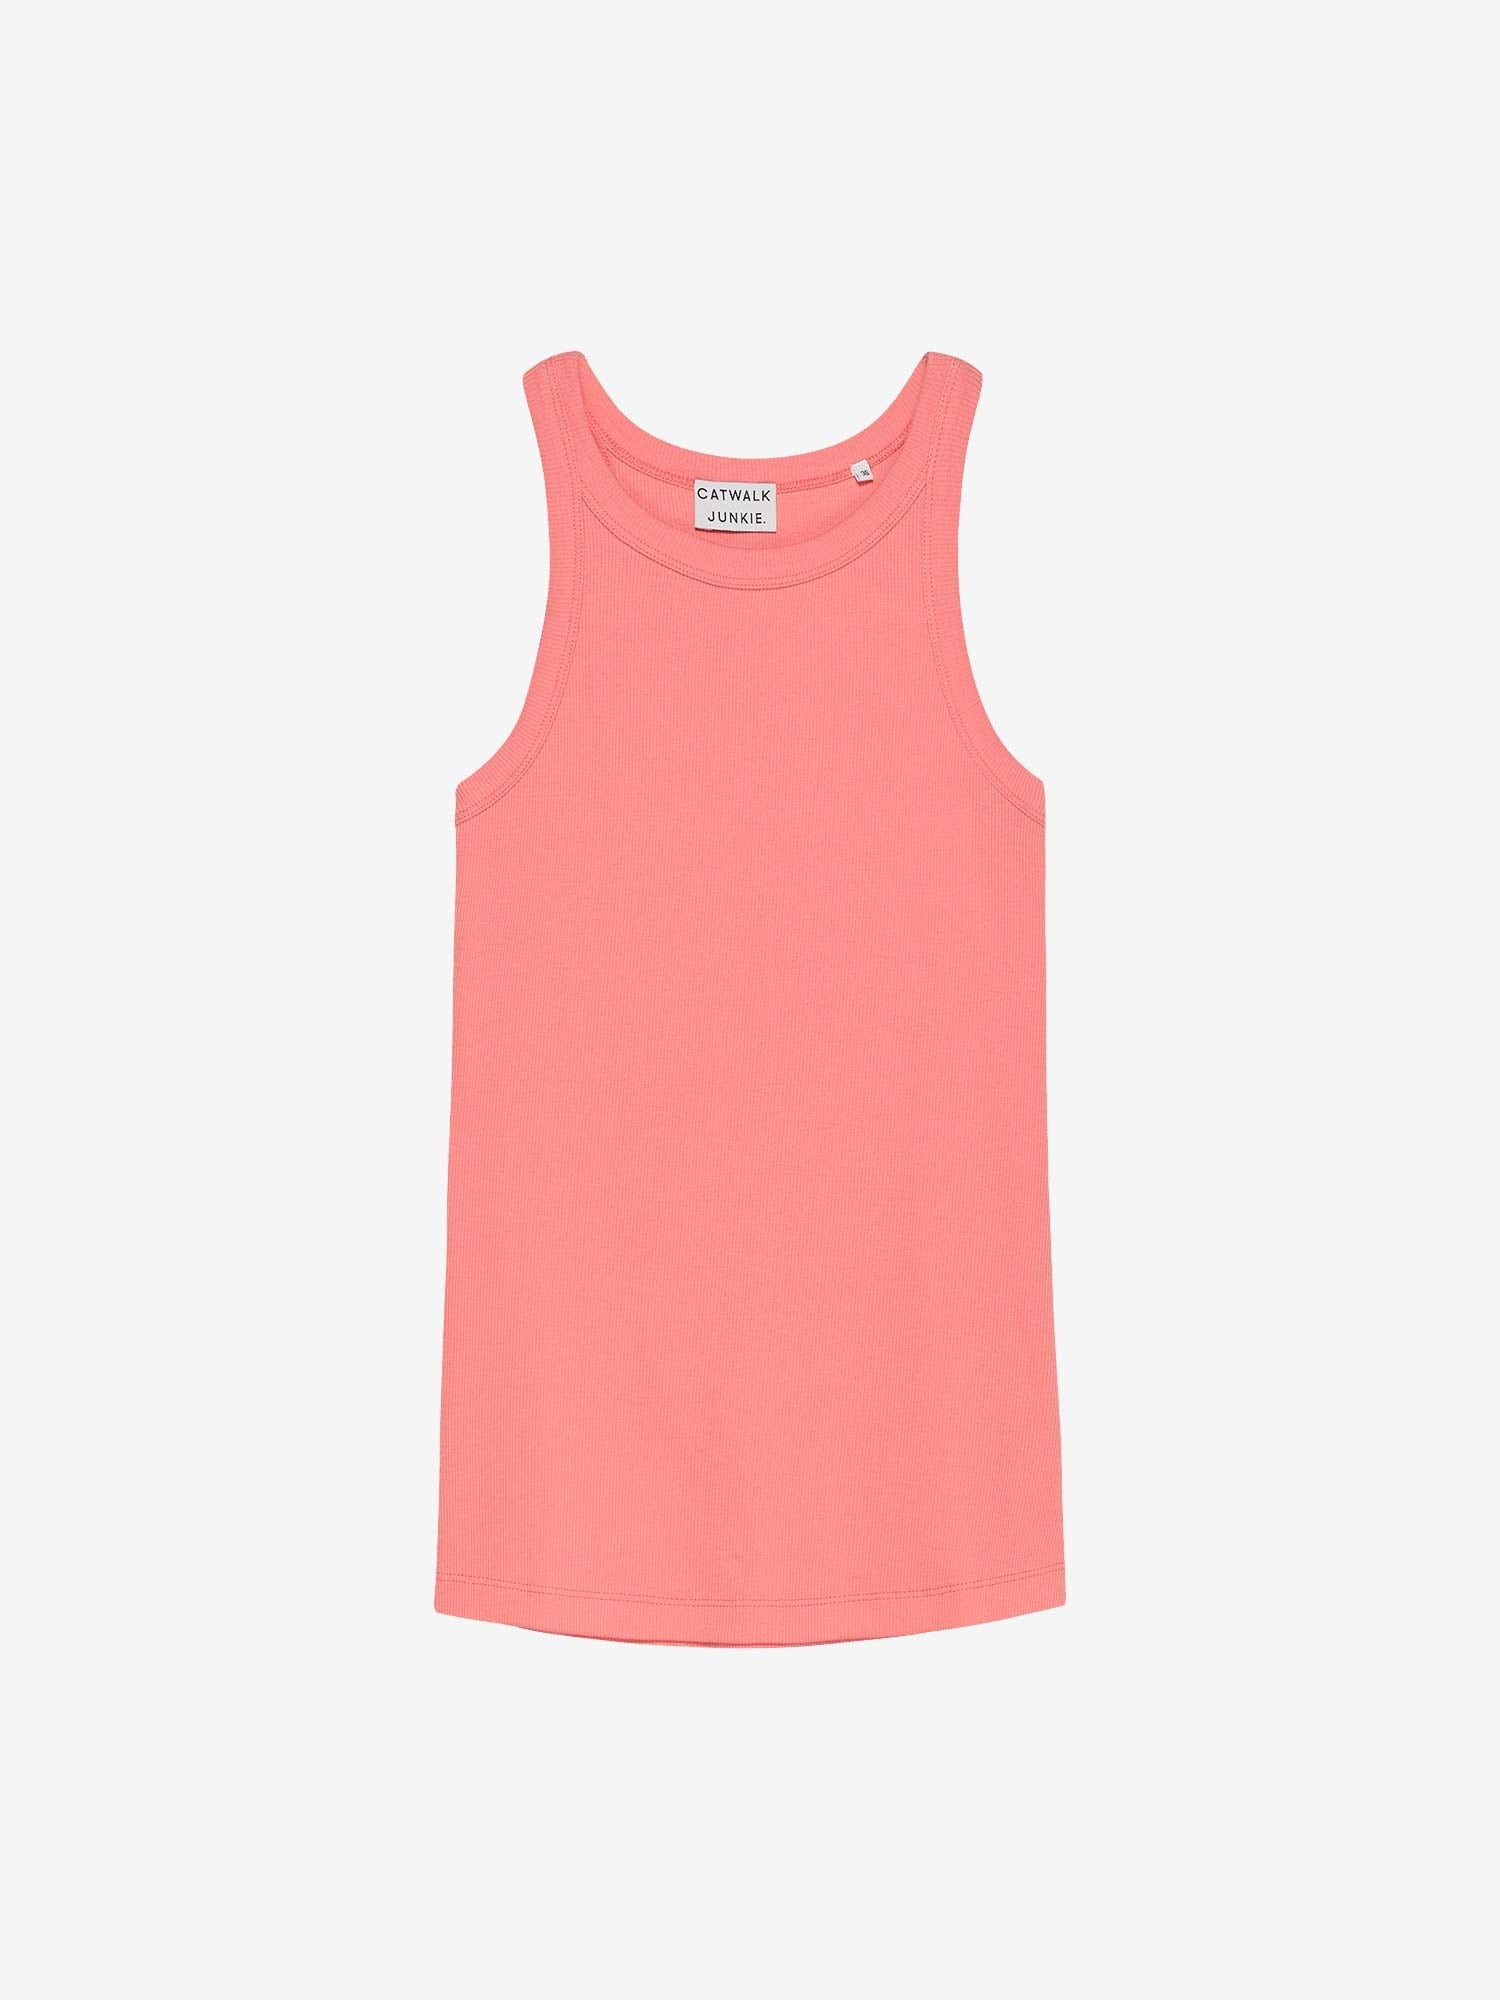 849 - Shell Pink